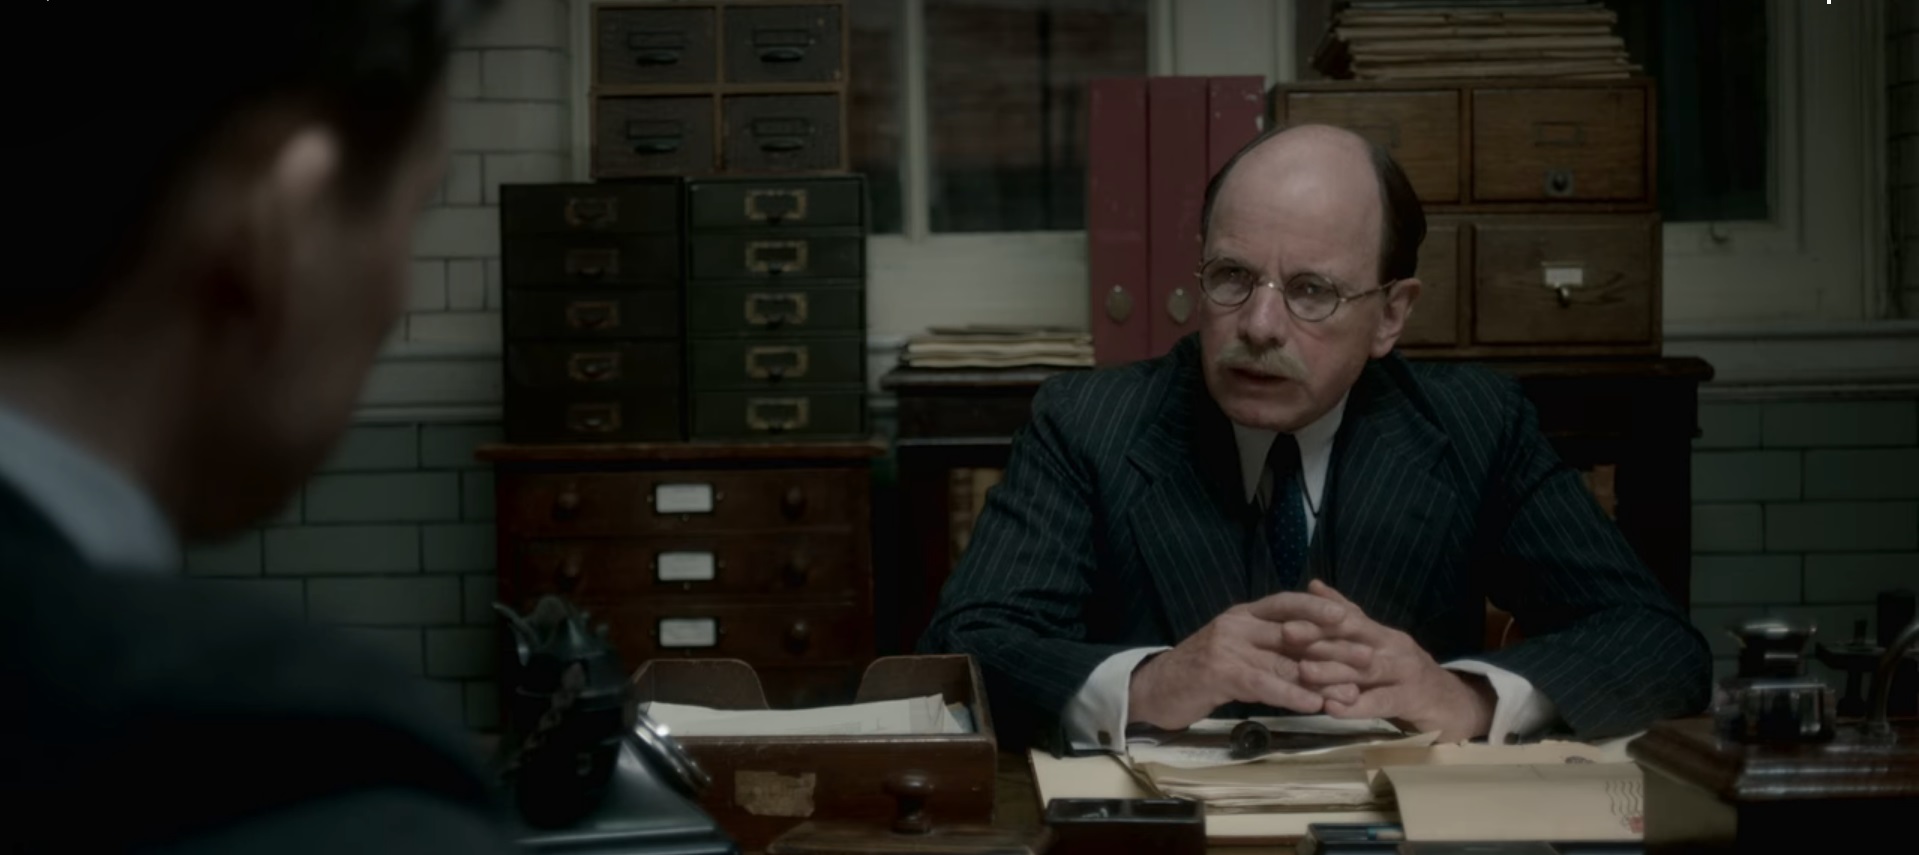 Screen grab from The Crown showing an actor playing a bald and bespectacled Atlee at his desk in his office. Behind him on a credenza are a variety of files including two card index boxes each with four drawers.